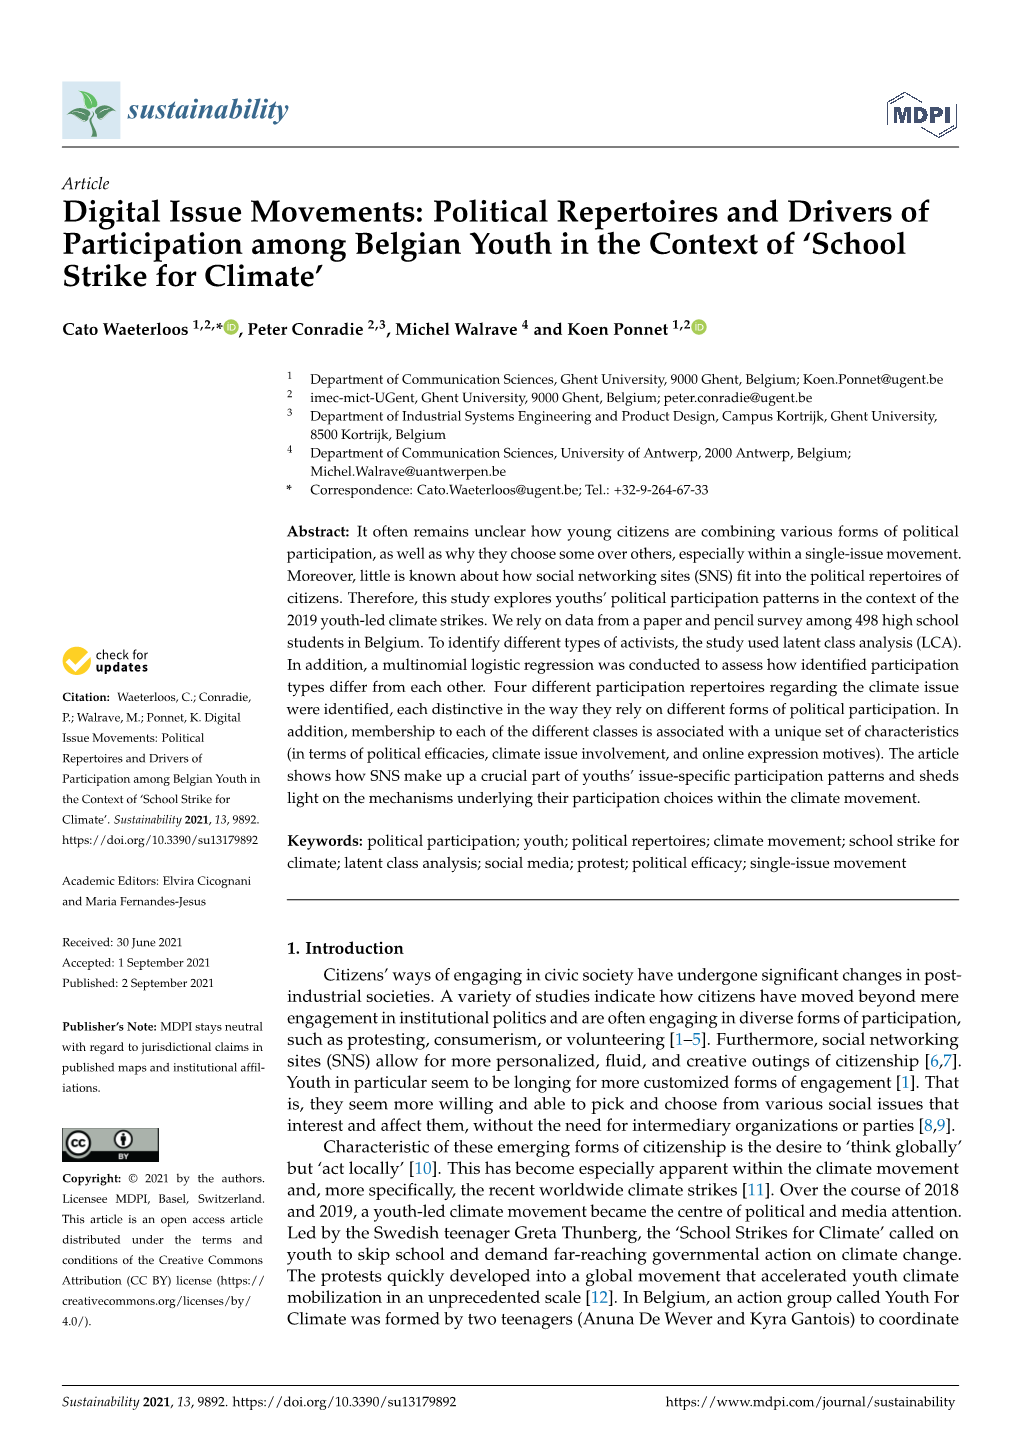 Political Repertoires and Drivers of Participation Among Belgian Youth in the Context of ‘School Strike for Climate’